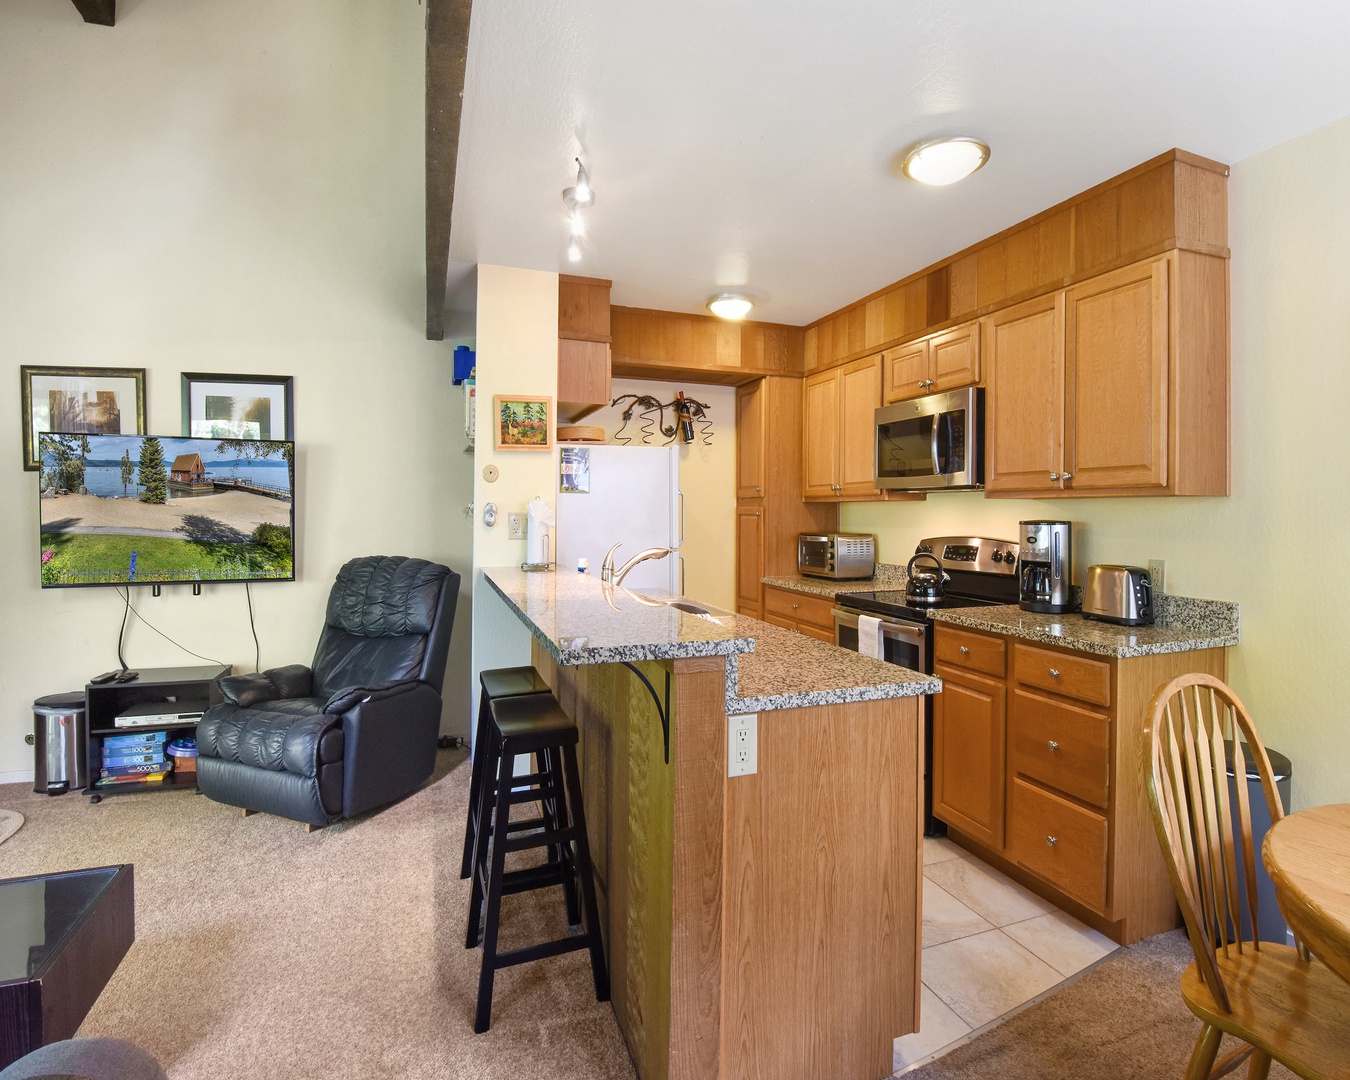 Kitchen with drip coffee pot, toaster, toaster oven, and more